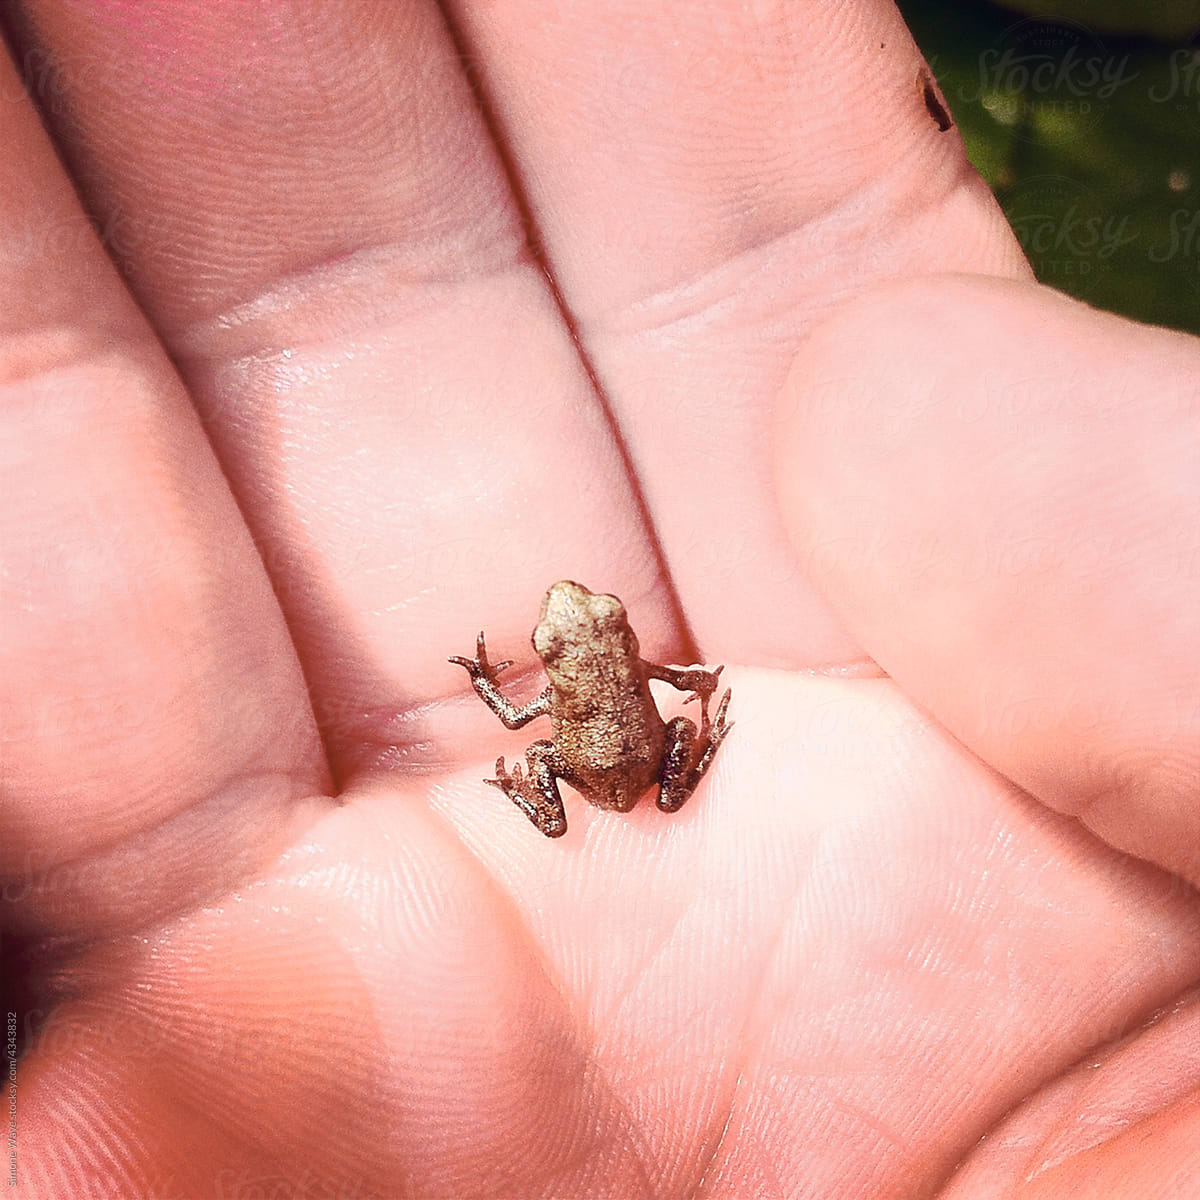 Small frog in the hand